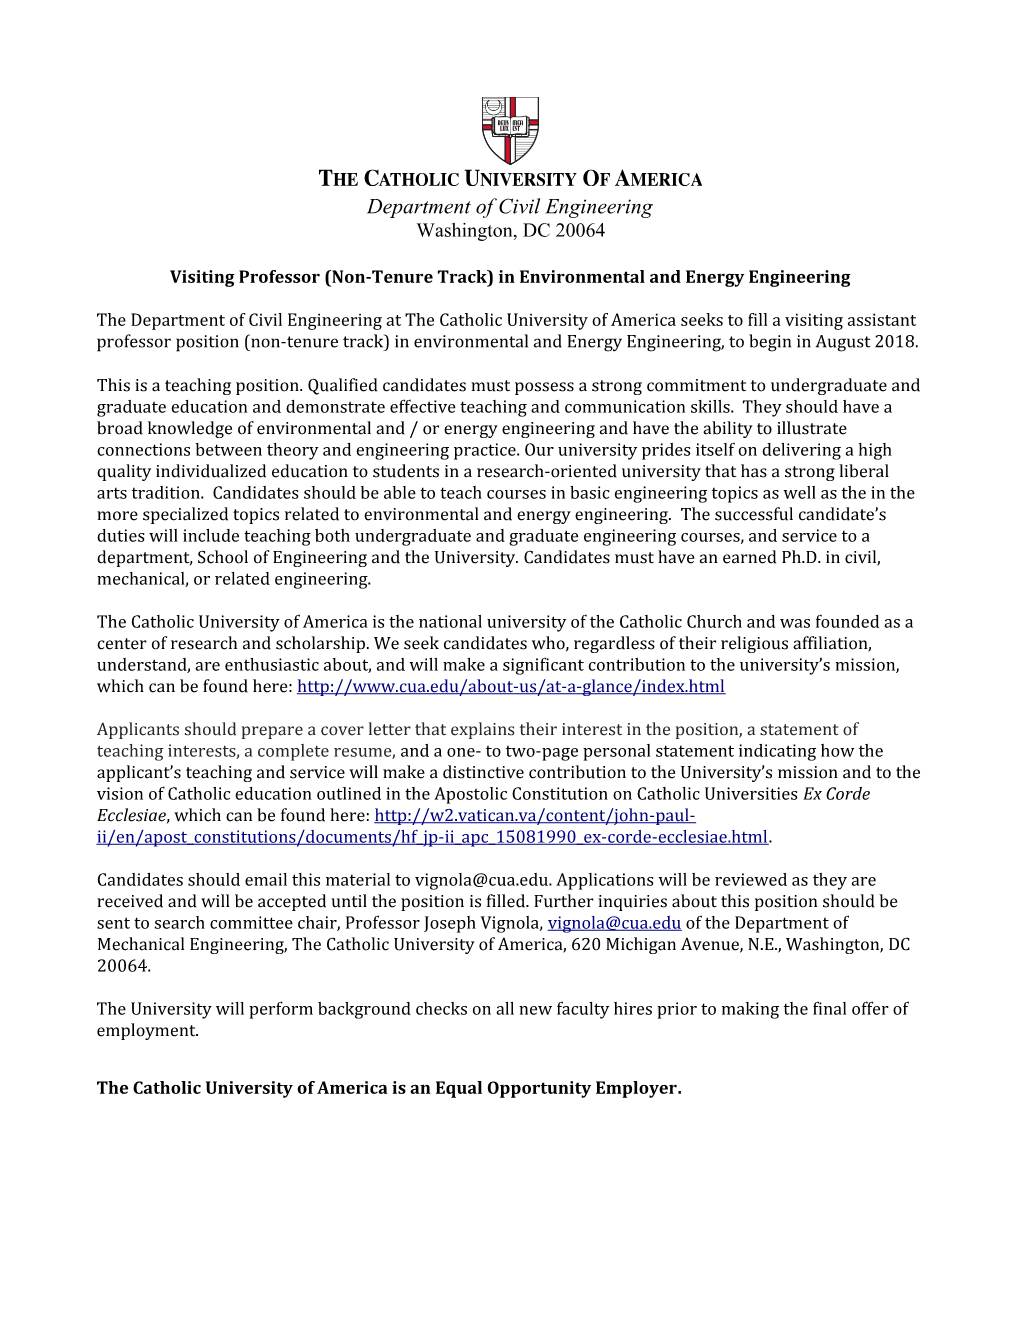 Visiting Professor (Non-Tenure Track) in Environmental and Energy Engineering